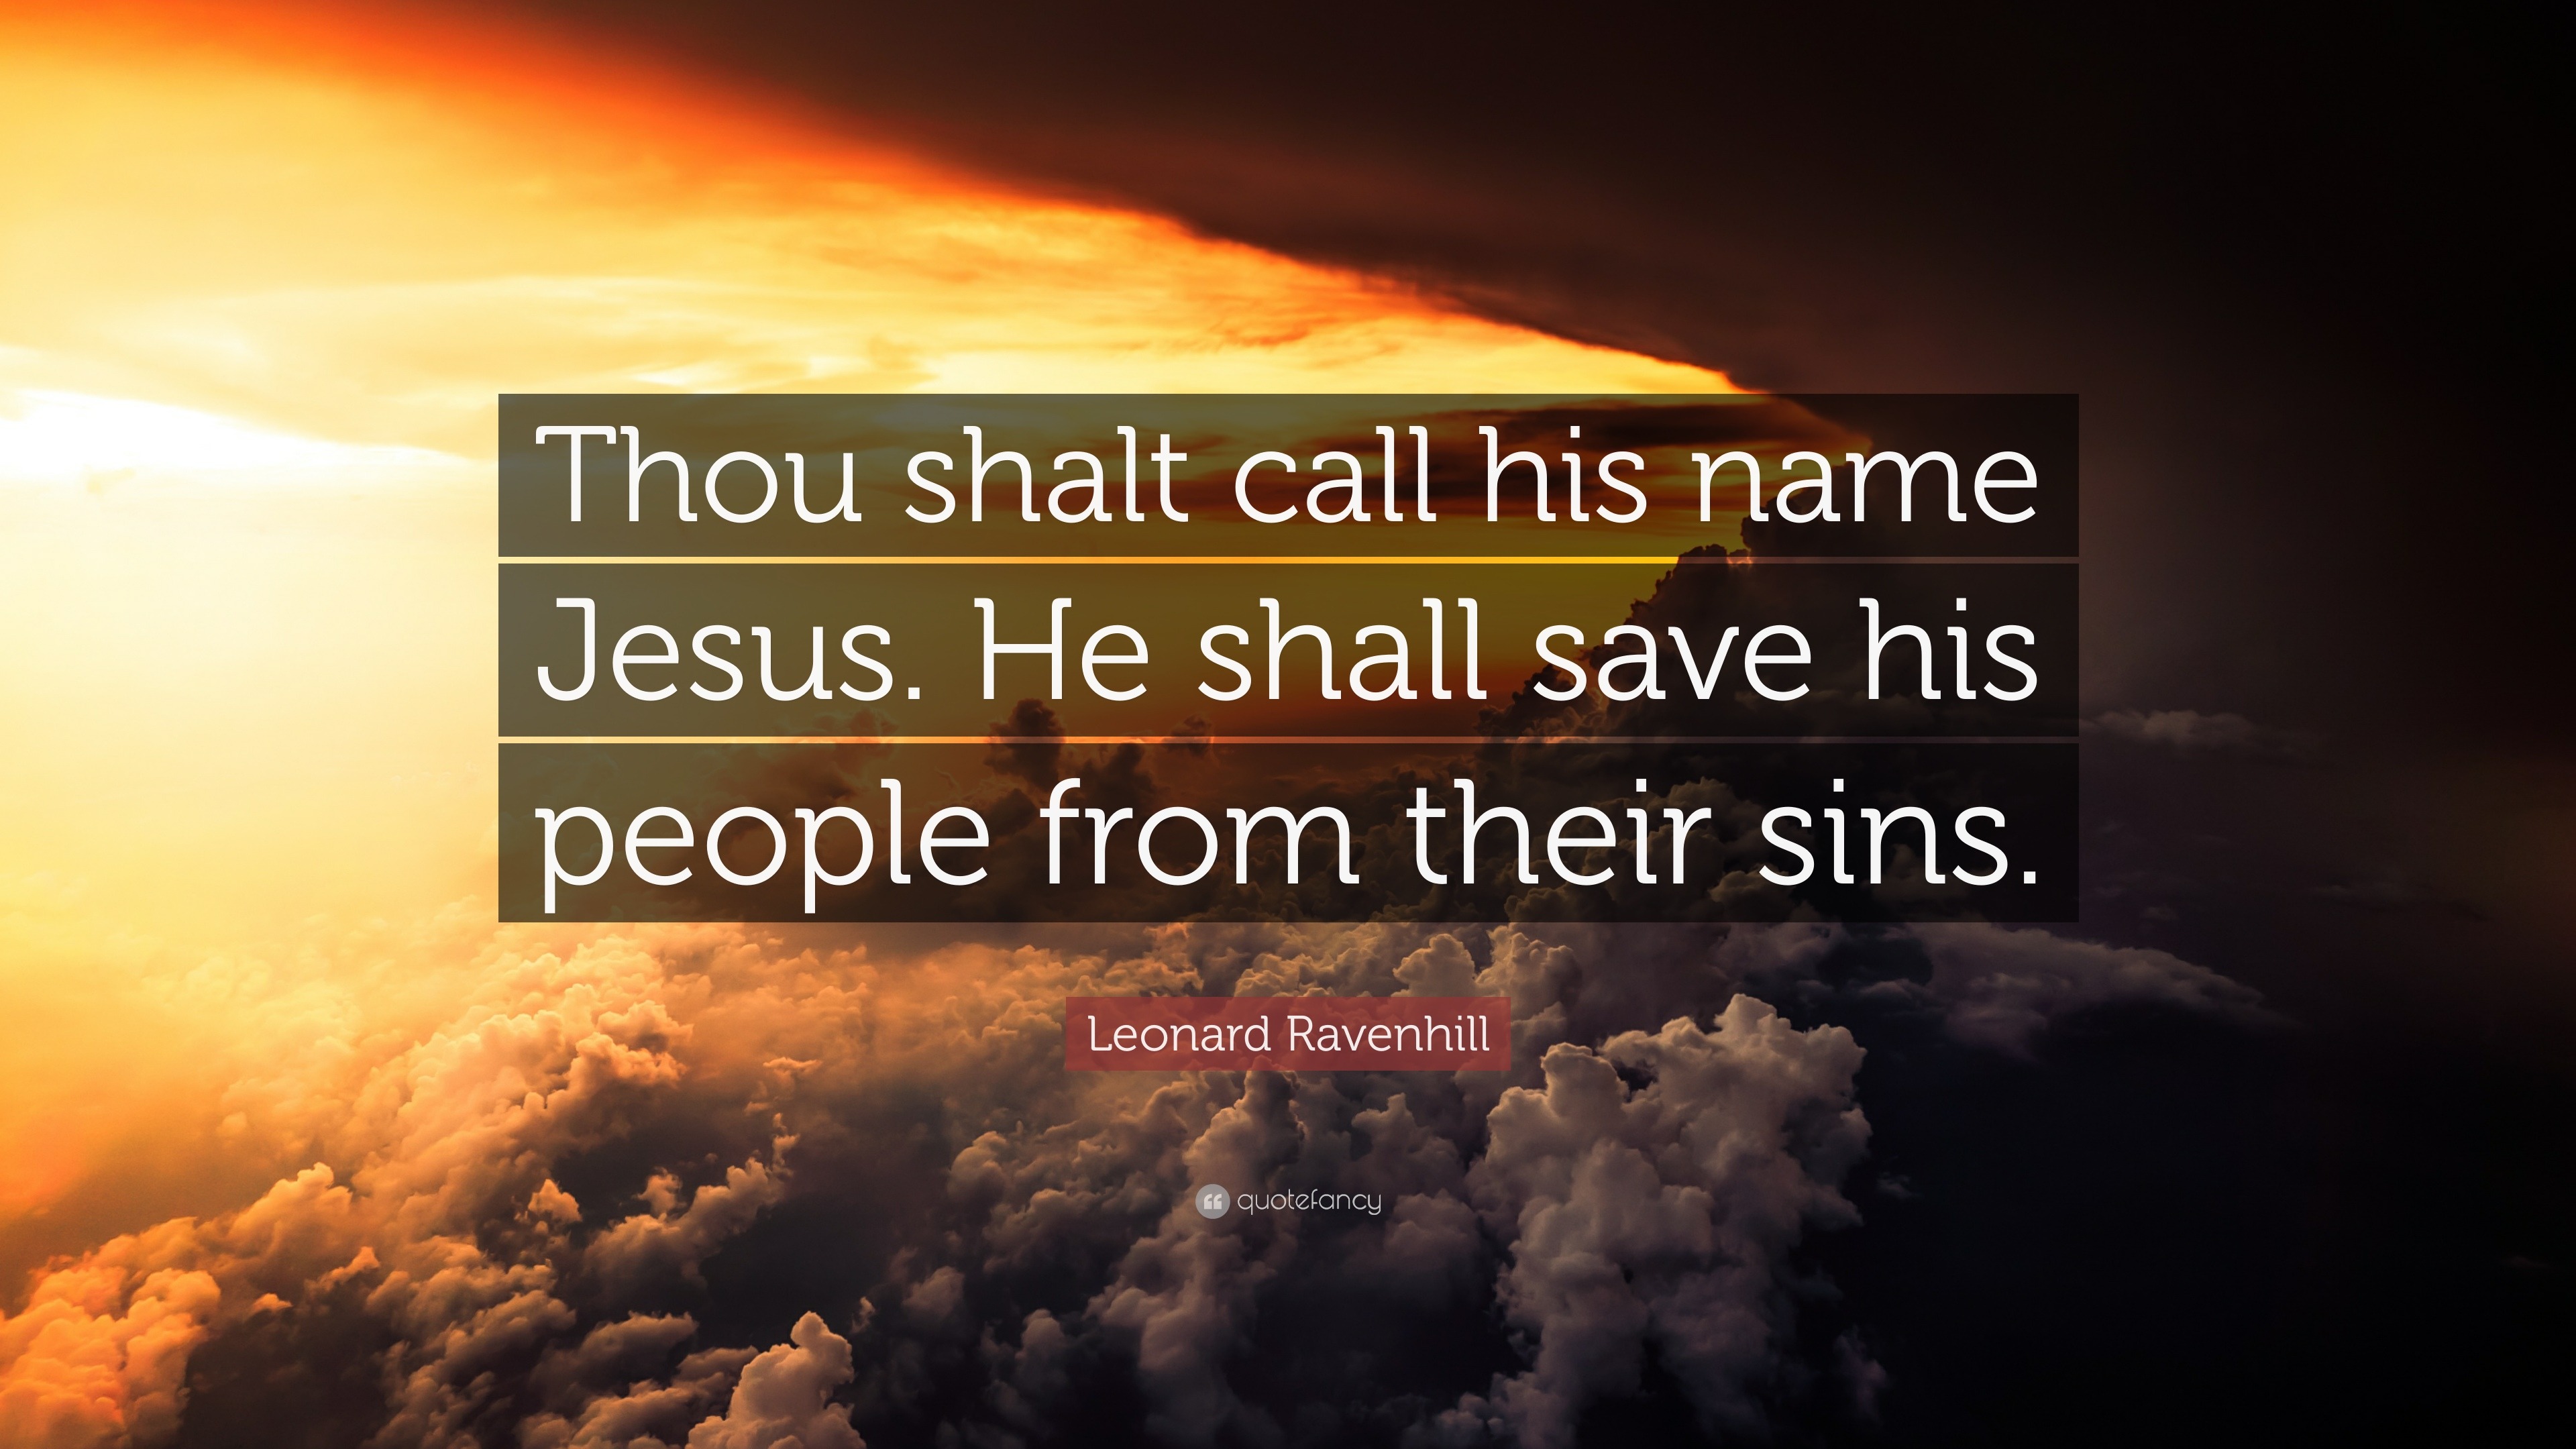 Leonard Ravenhill Quote Thou Shalt Call His Name Jesus He Shall Save His People From Their